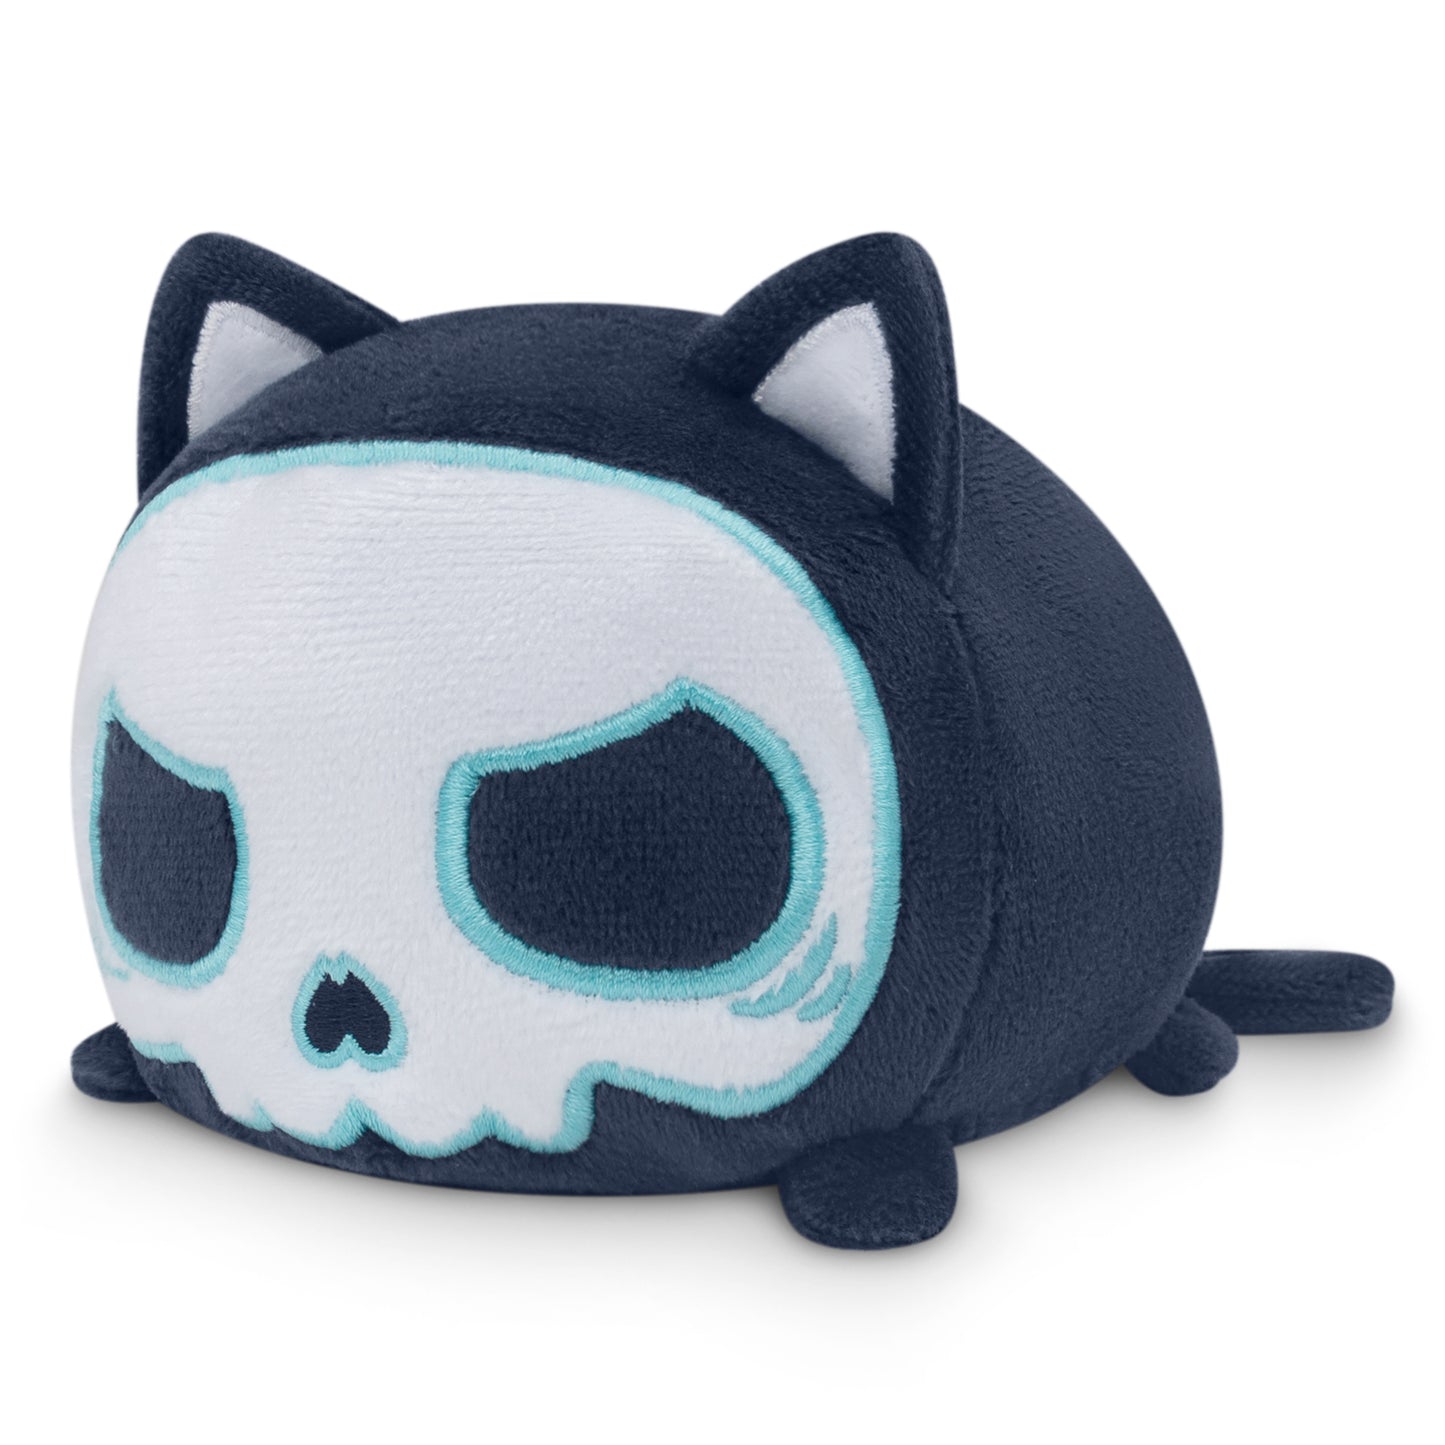 A Plushiverse Skeleton Cat Plushie Tote Bag with blue eyes, perfect for TeeTurtle plushies.